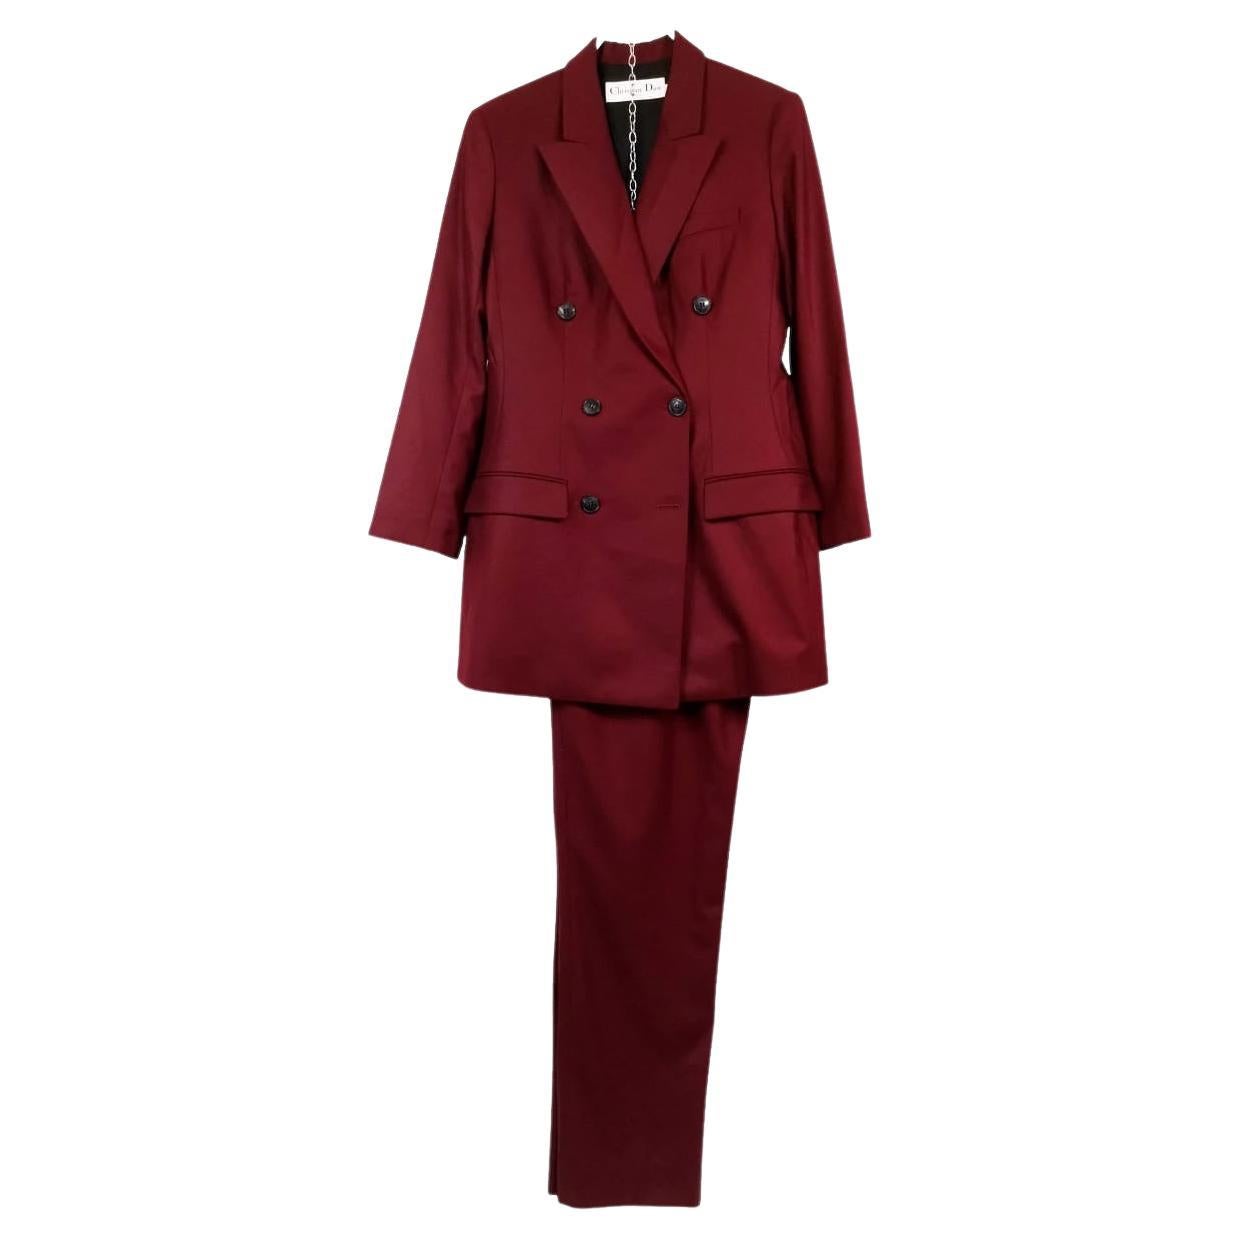 Christian Dior Jacket & Trousers Suit For Sale